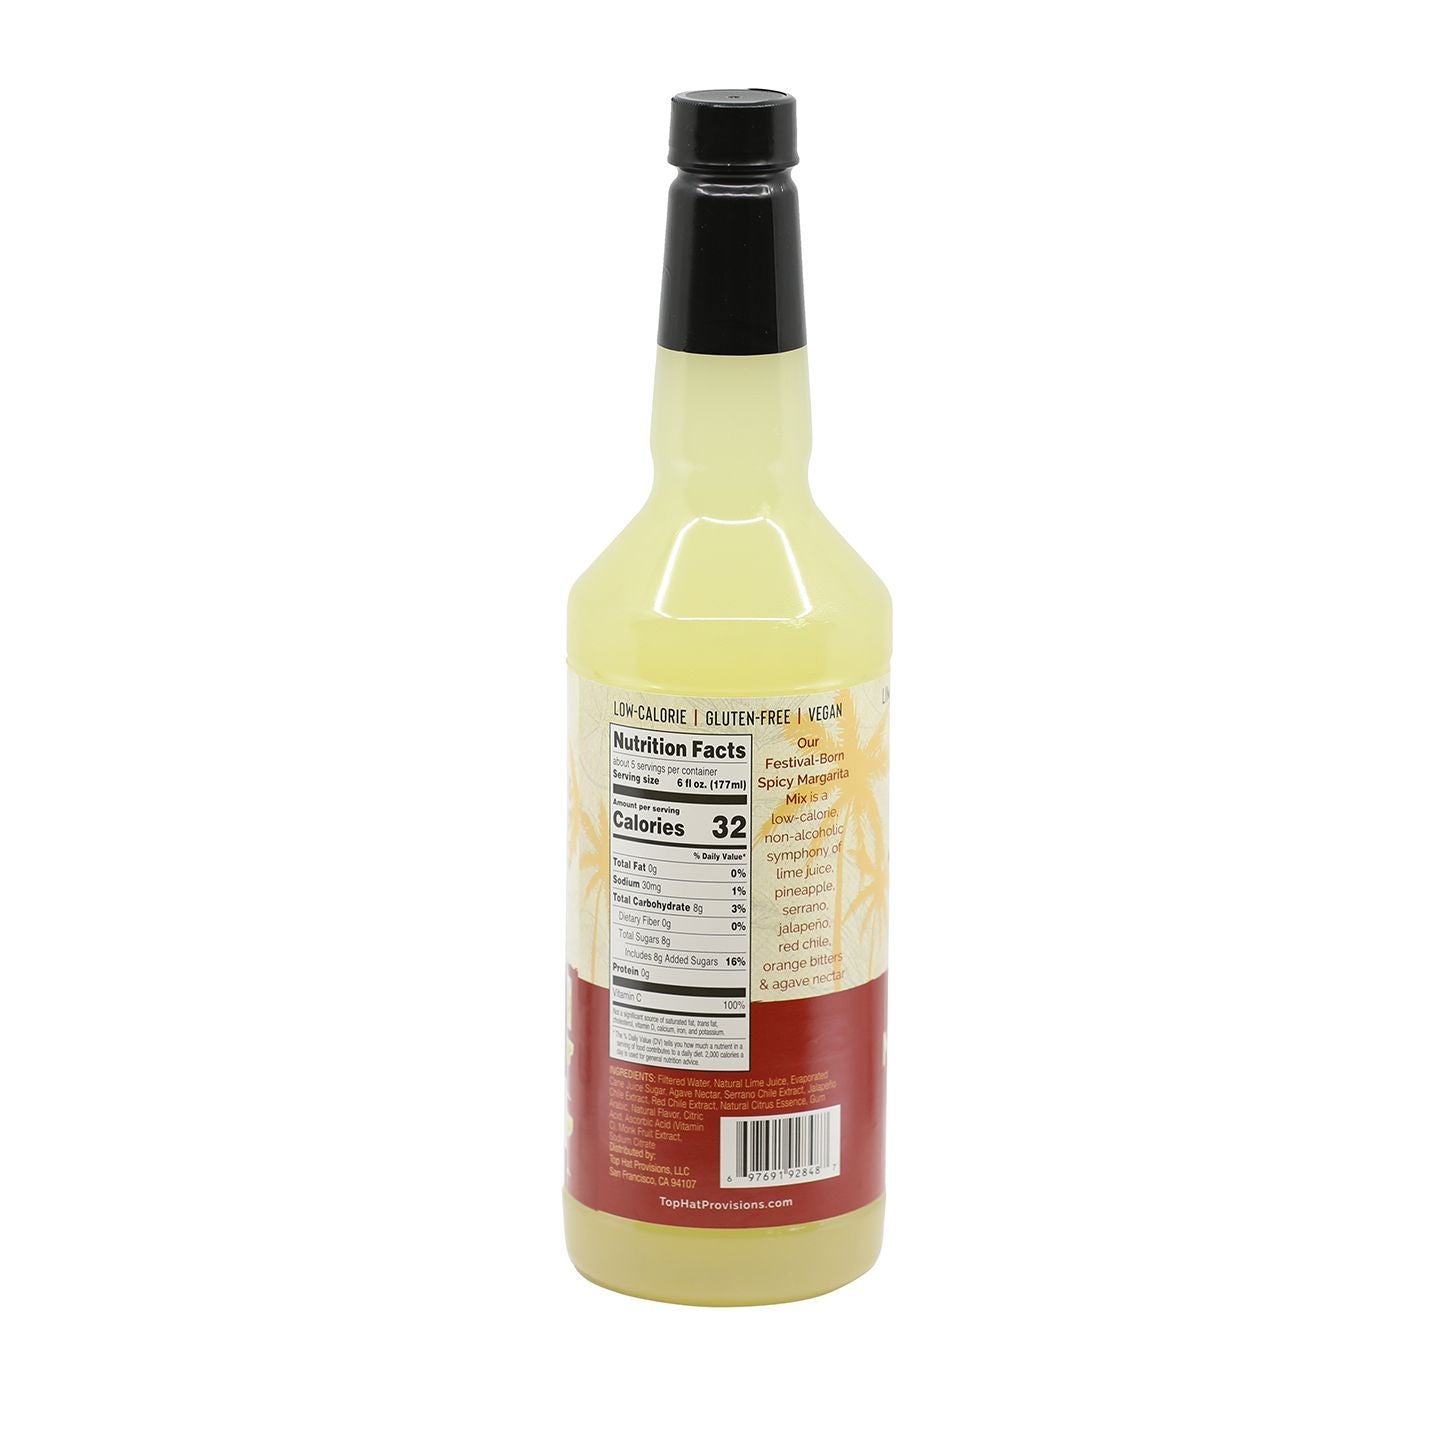 Top Hat Spicy Margarita Mix (made with agave nectar & organic lime juice) - 32oz Bottle